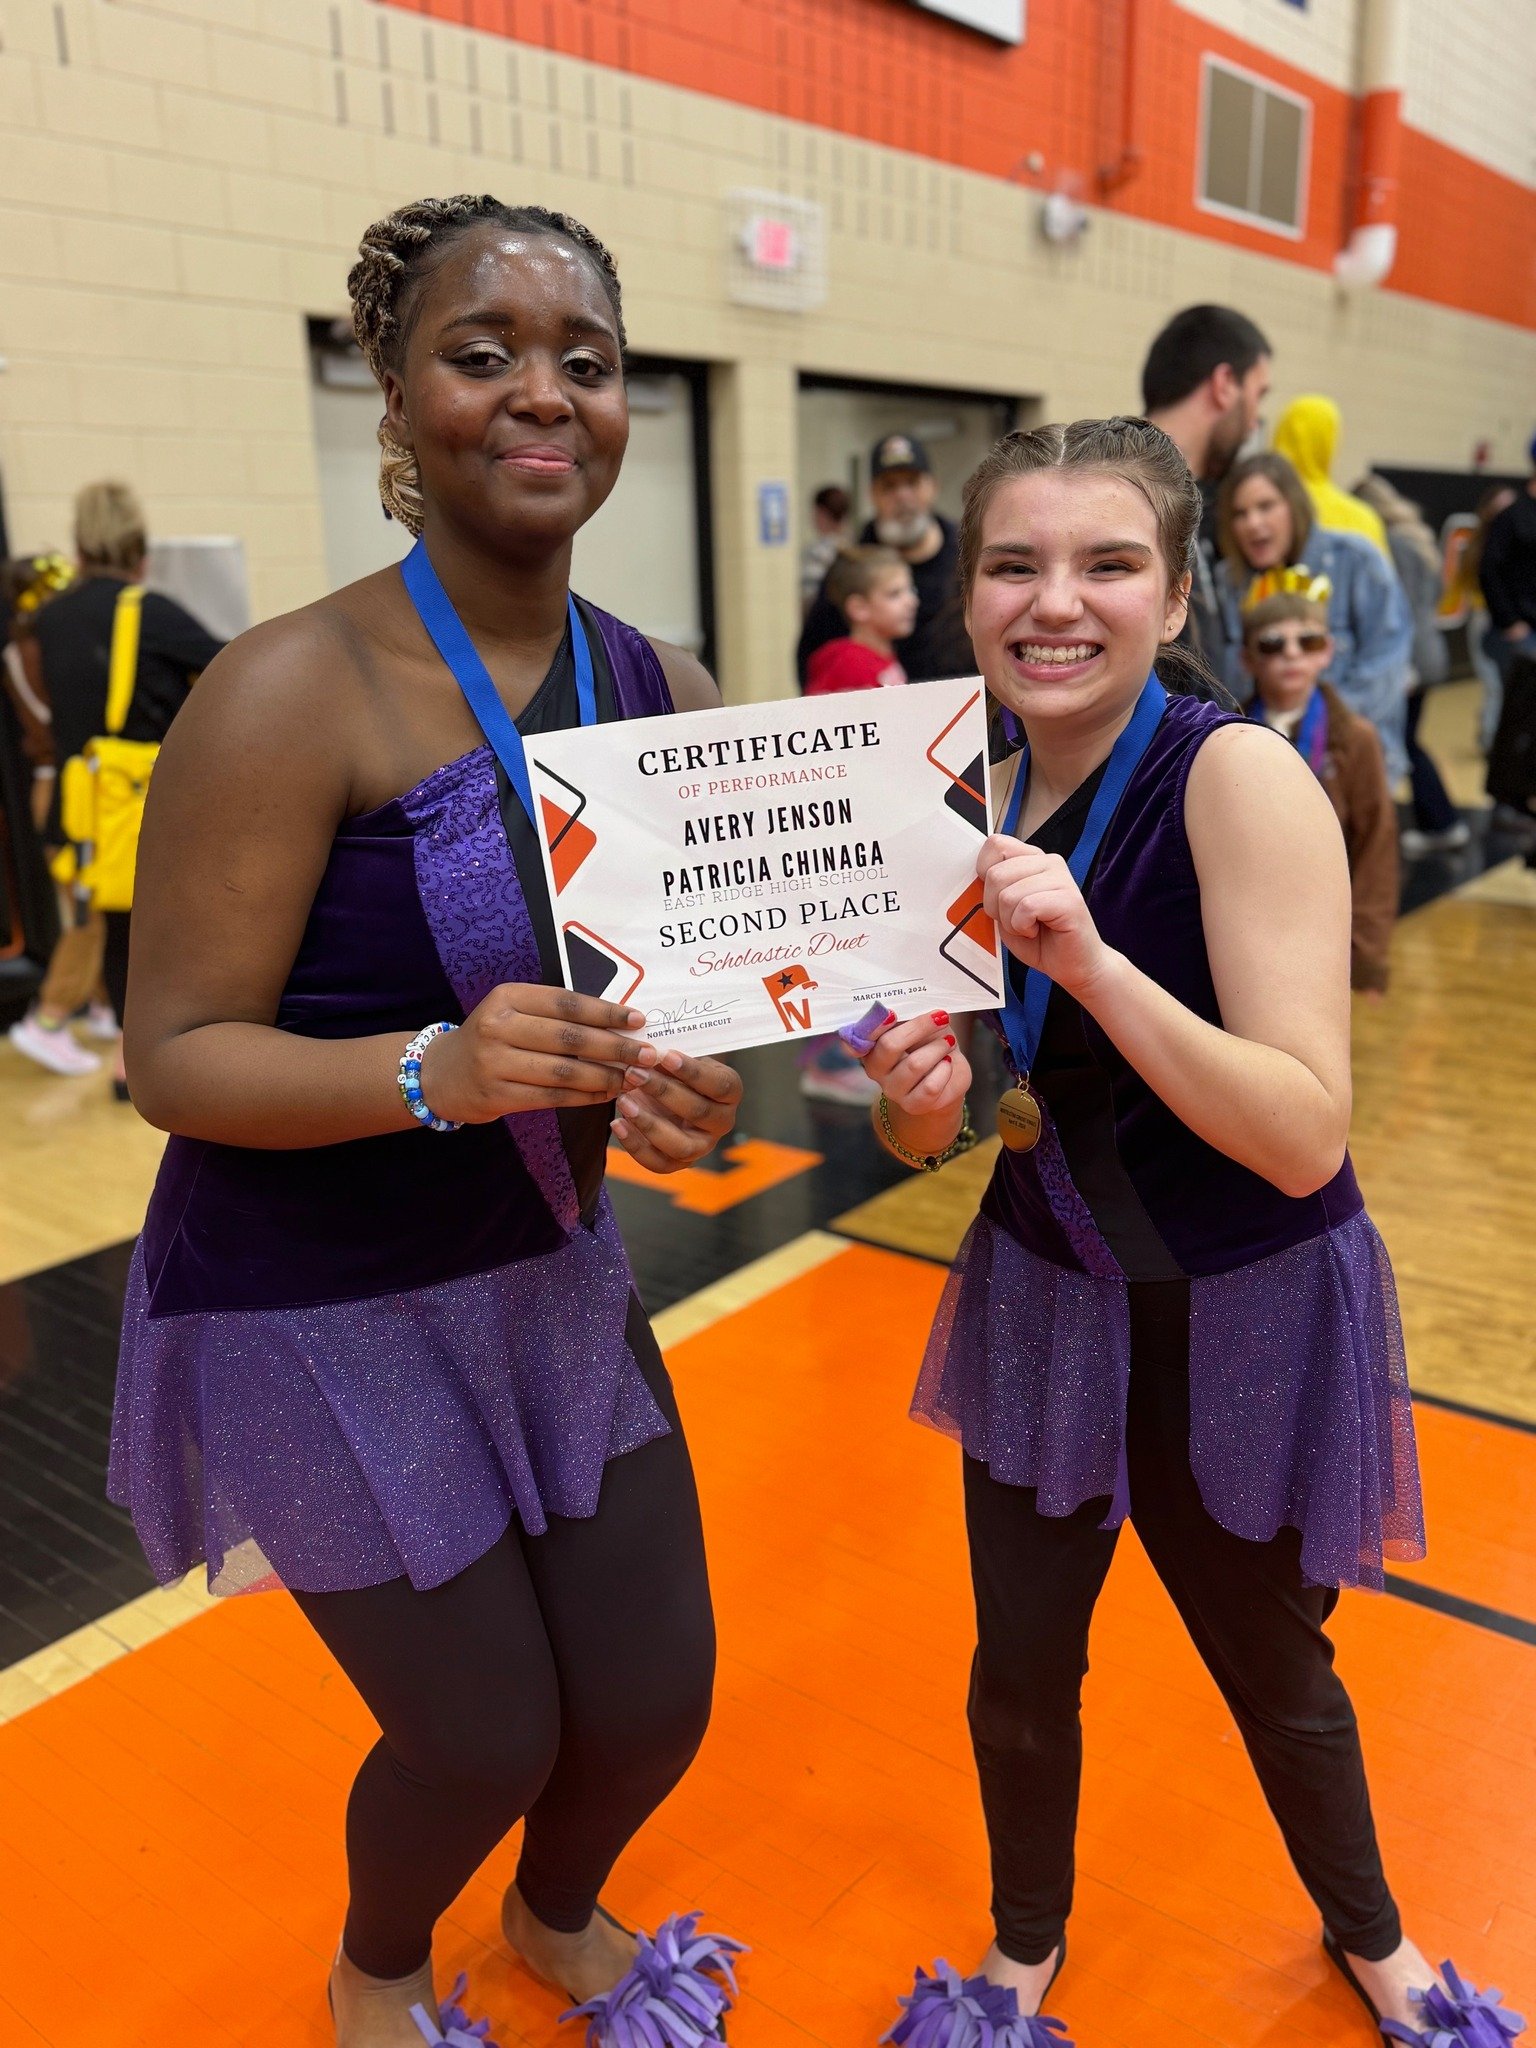 Congratulations to Avery and Patricia who earned second place for their Scholastic Duet at the Winter Guard competition last weekend at Osseo High School. Way to go ladies!